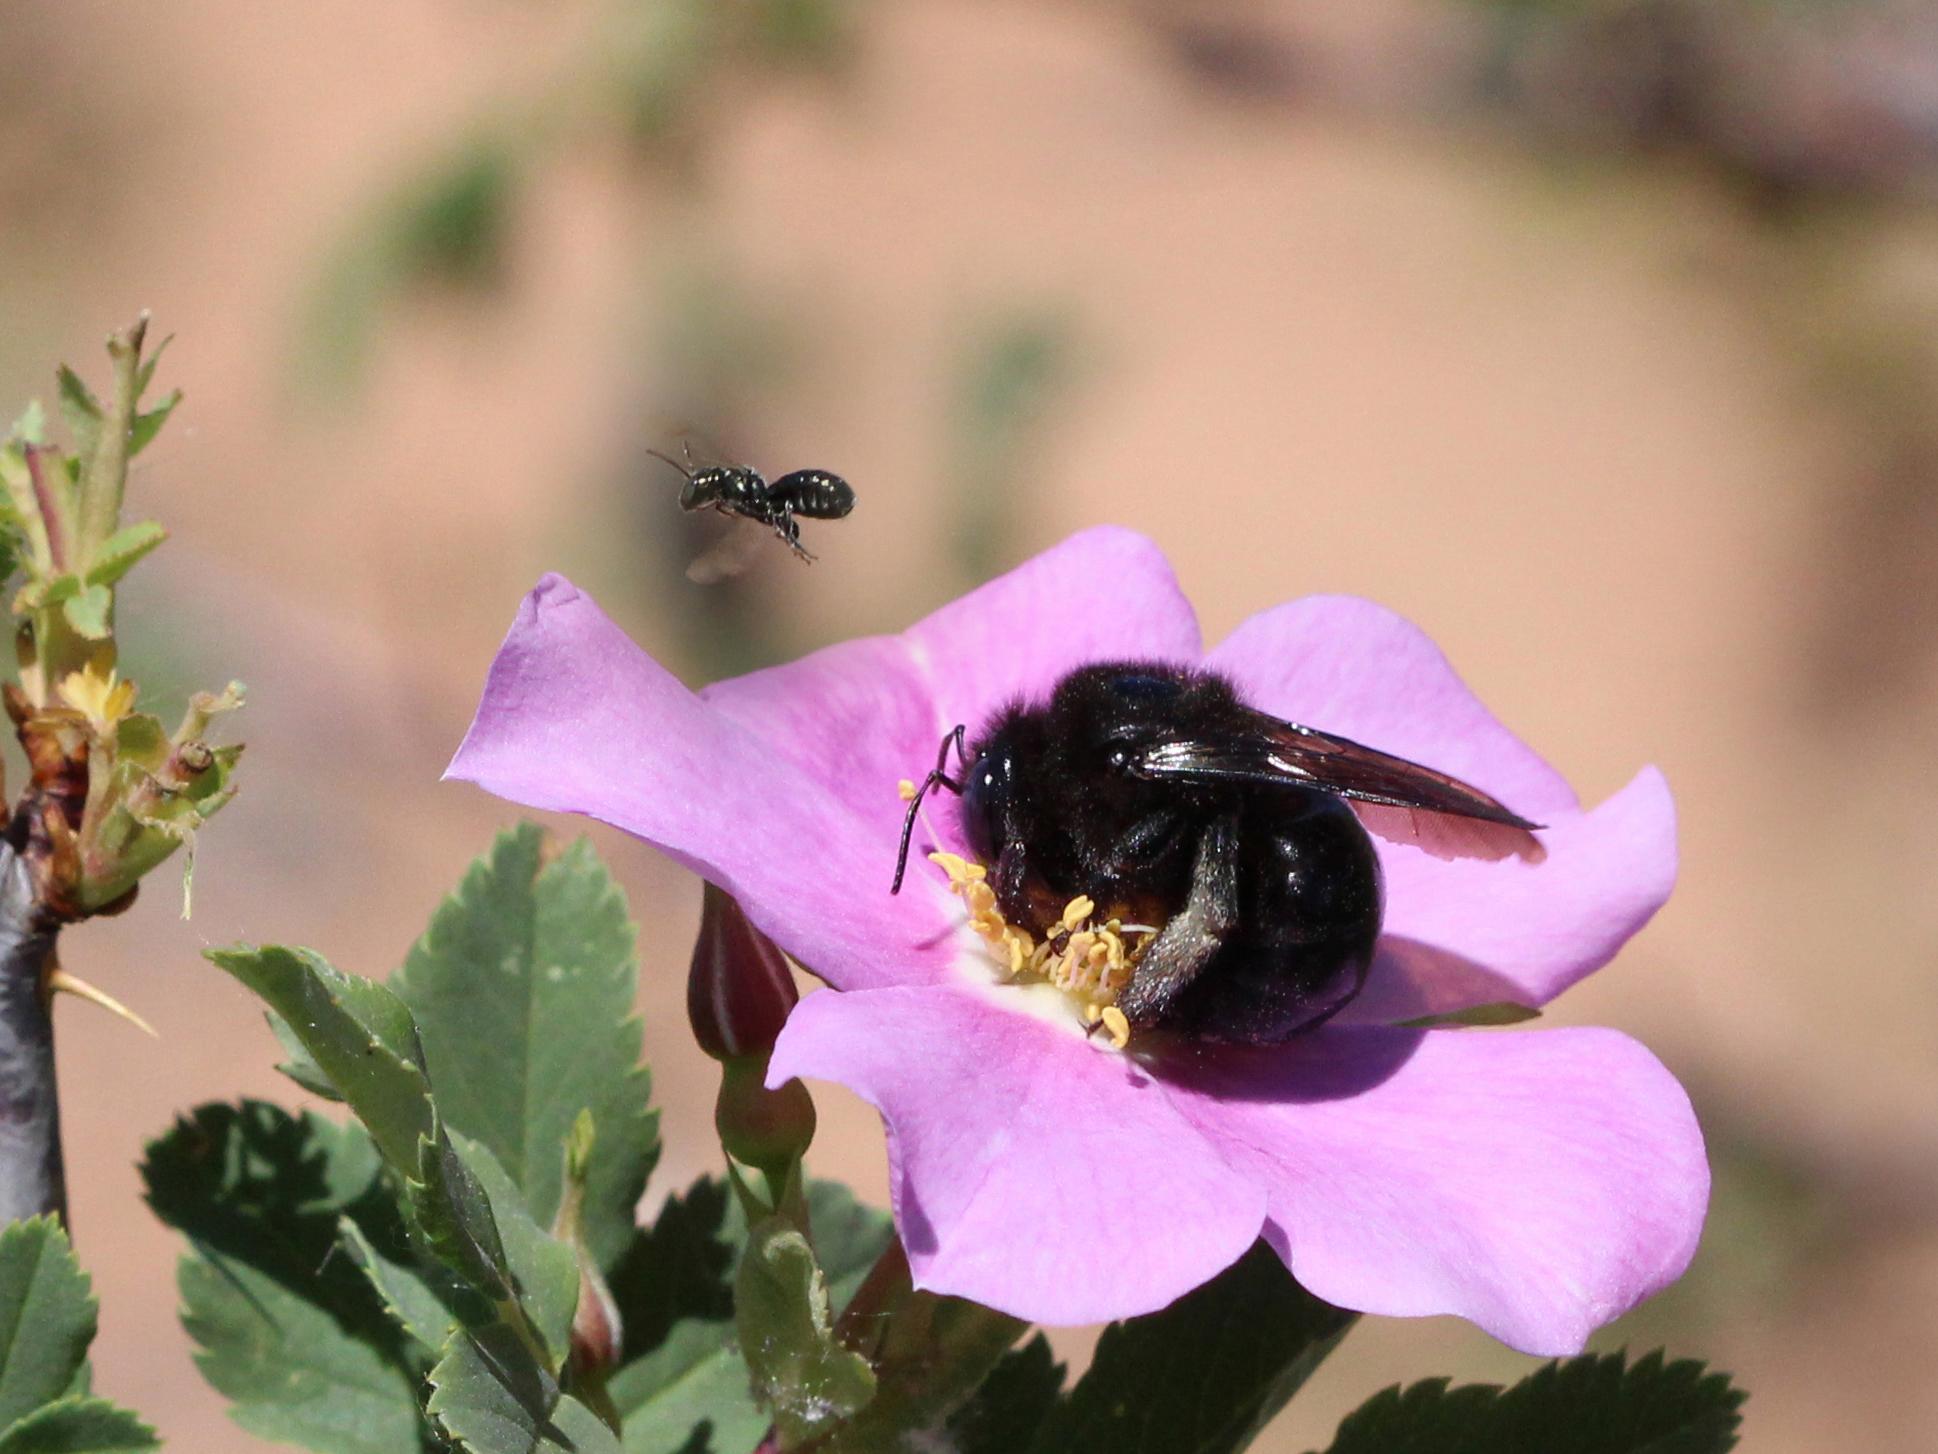 Two species of carpenter bees visiting a wild rose in Utah's Grand Staircase-Escalante National Monument